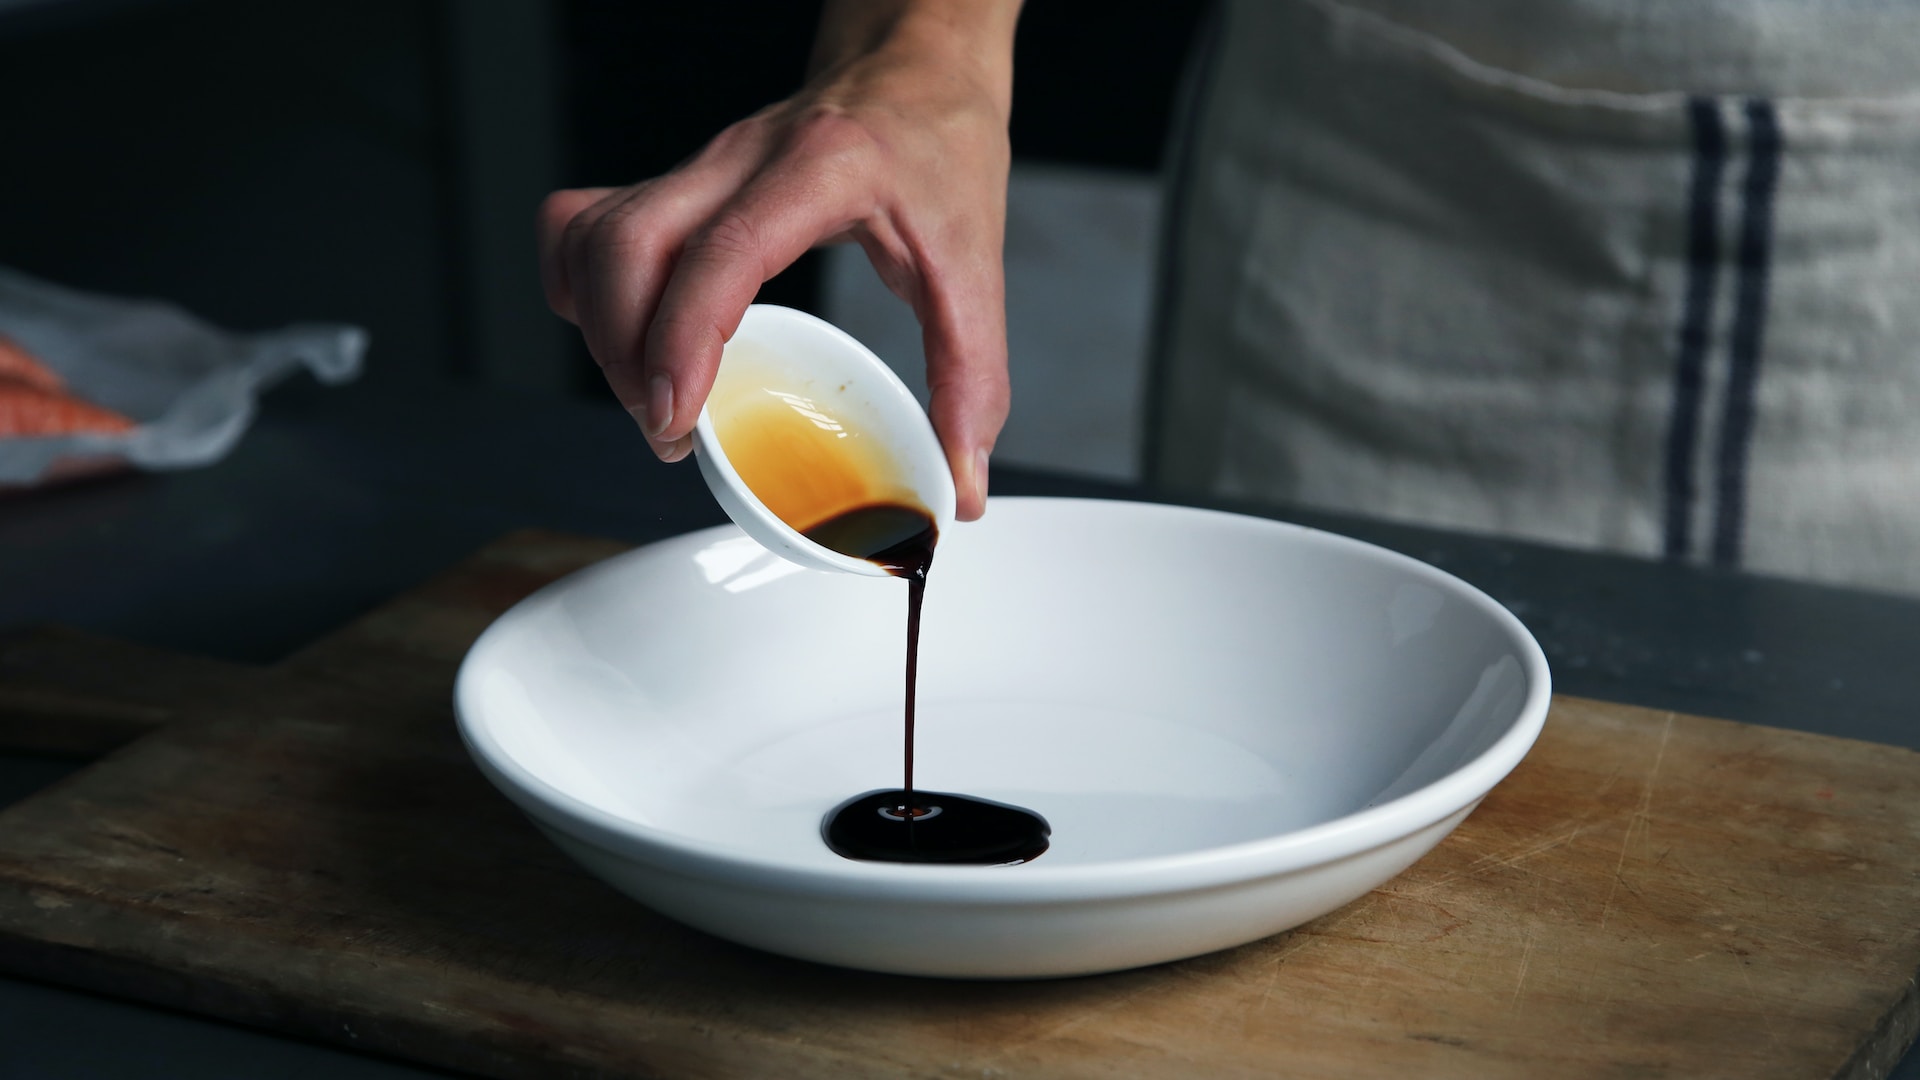 soy sauce dripping into bowl